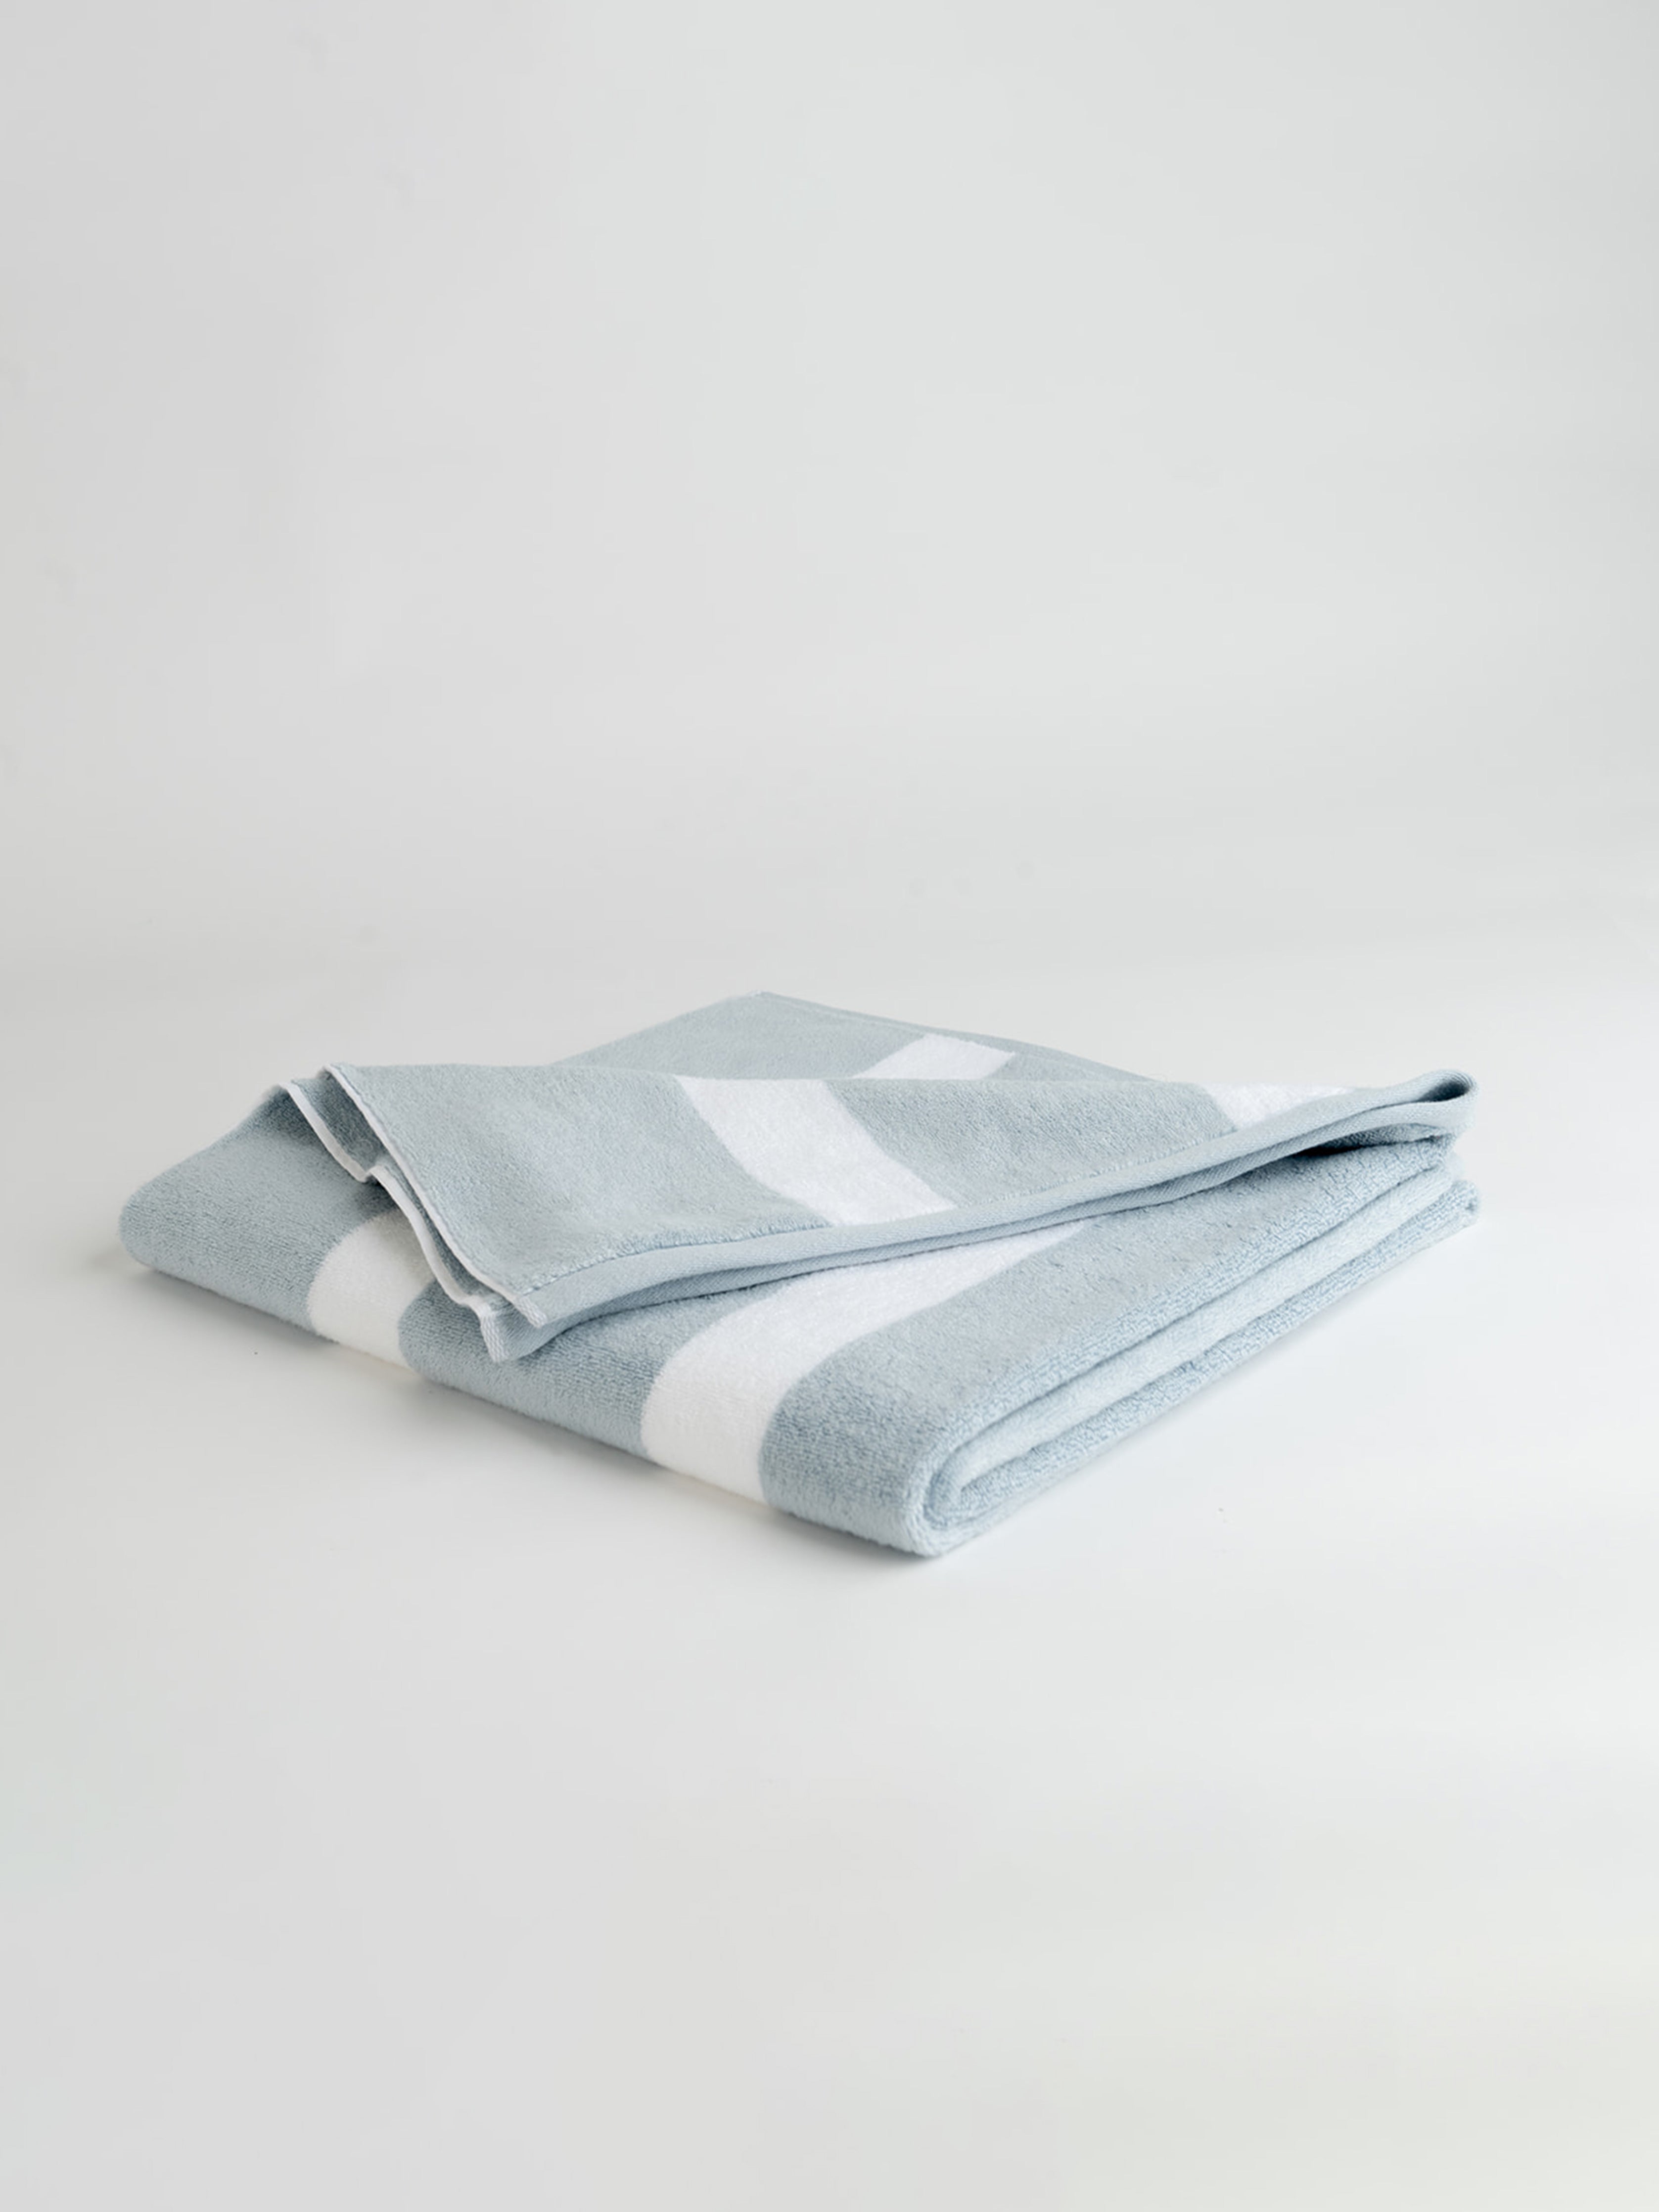 Breeze resort towel folded with a white background |Color:Breeze